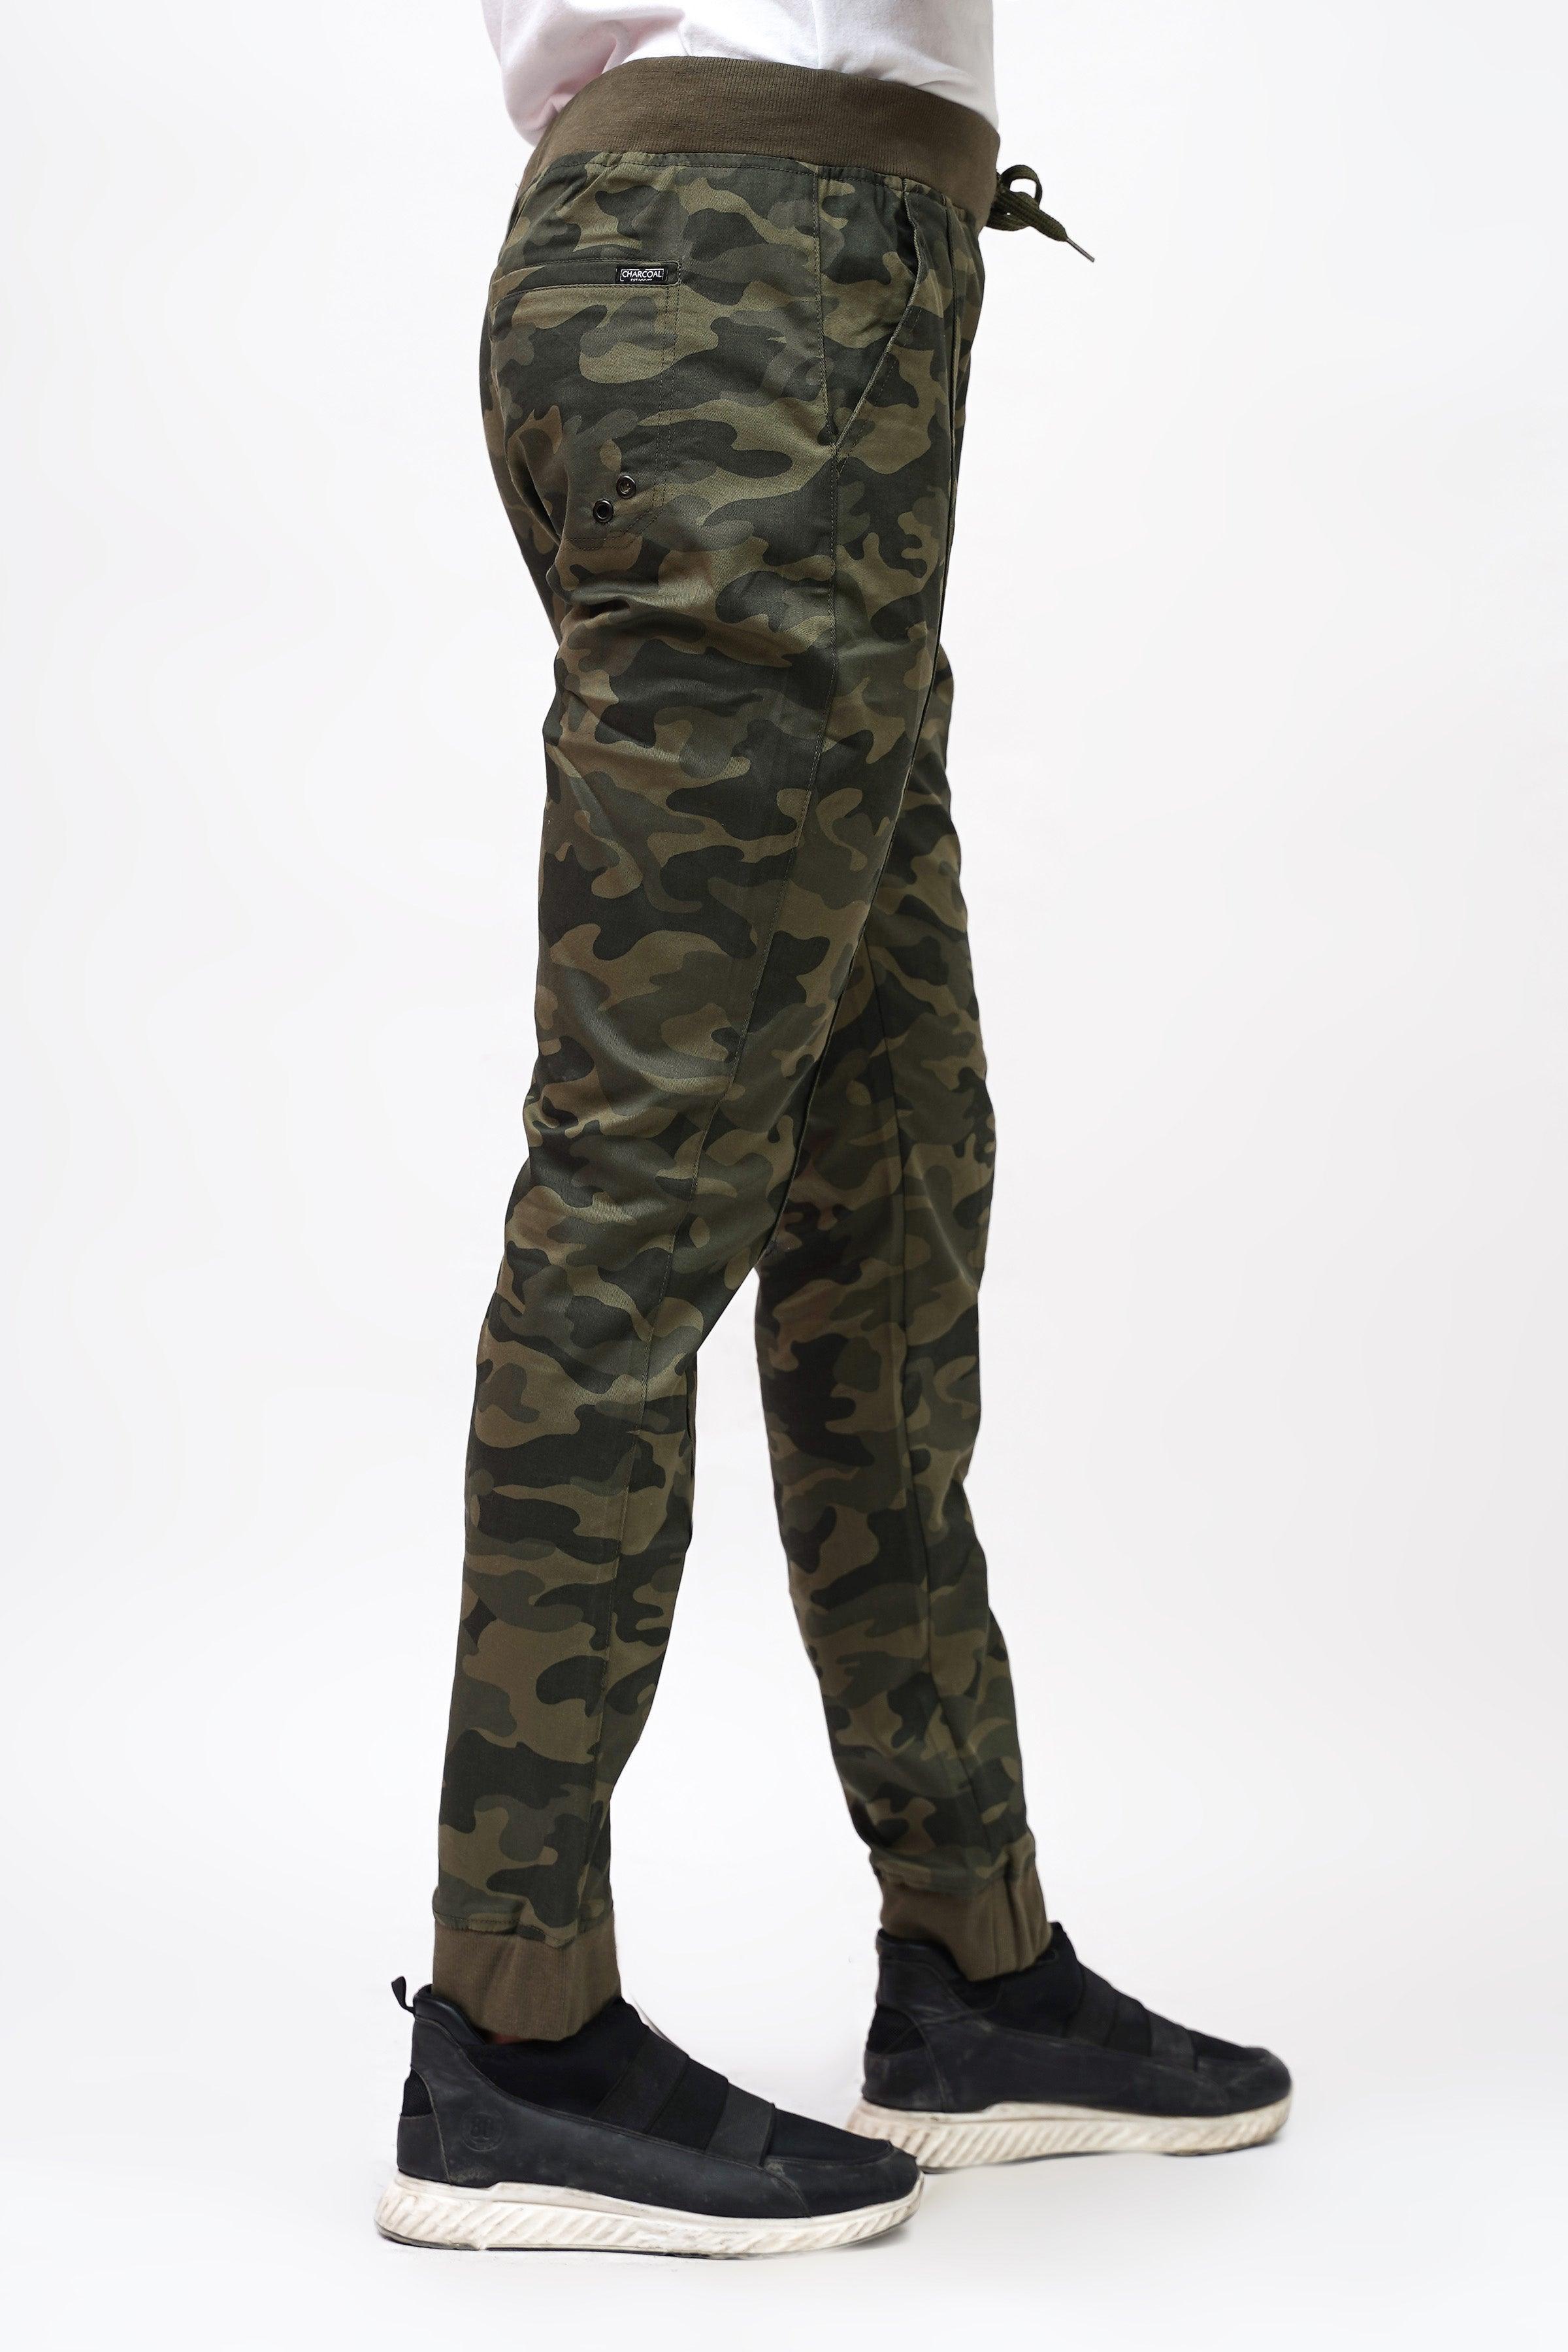 CAMOUFLAGE JOGGER SLIMFIT CAMOUFLAGE PRINT TROUSER